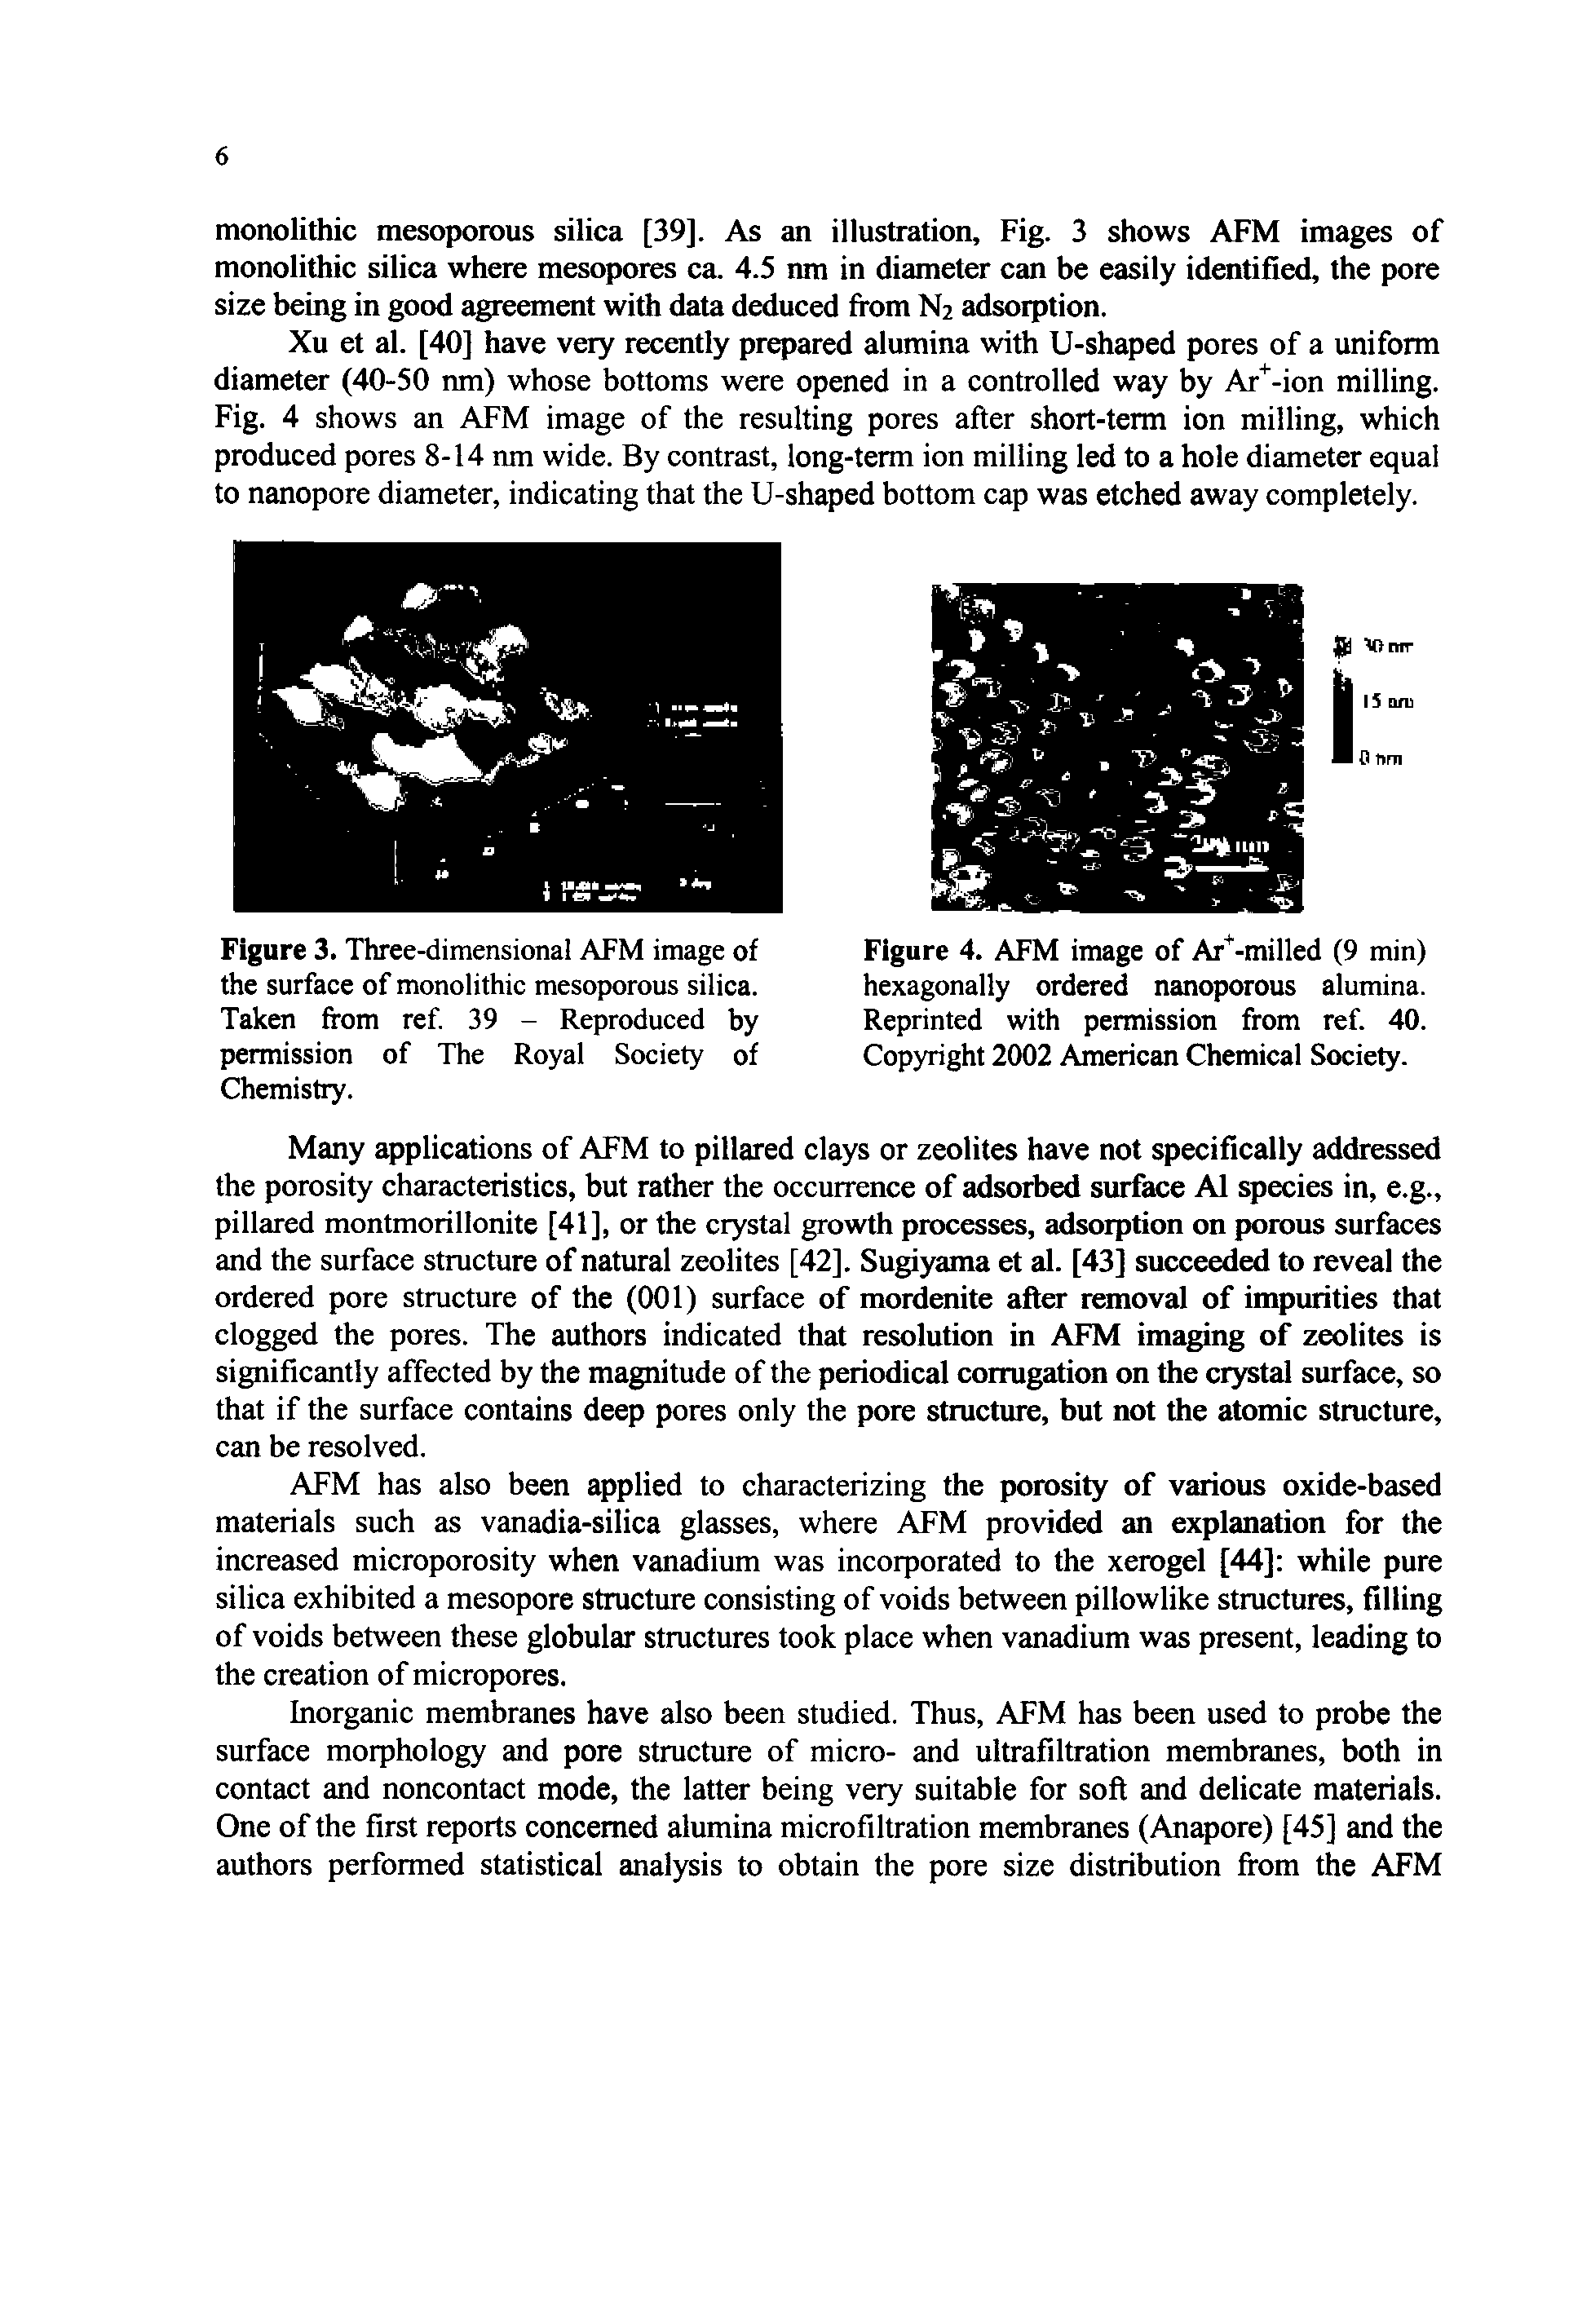 Figure 4. AFM image of Ar -milled (9 min) hexagonally ordered nanoporous alumina. Reprinted with permission from ref 40. Copyright 2002 American Chemical Society.